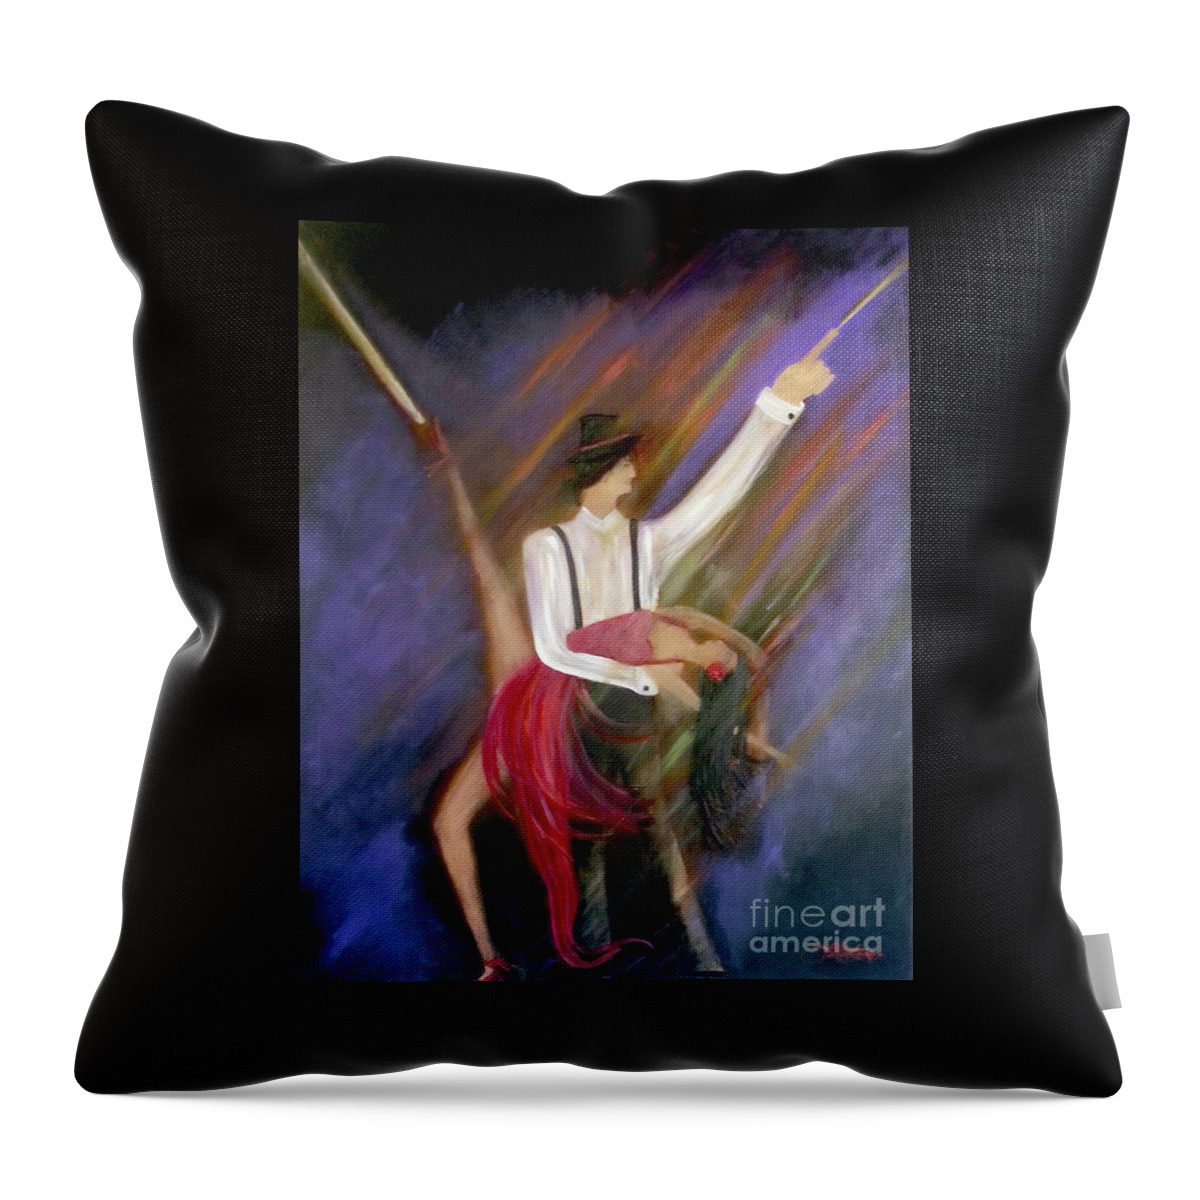 Dance Throw Pillow featuring the painting The Power Of Dance by Artist Linda Marie